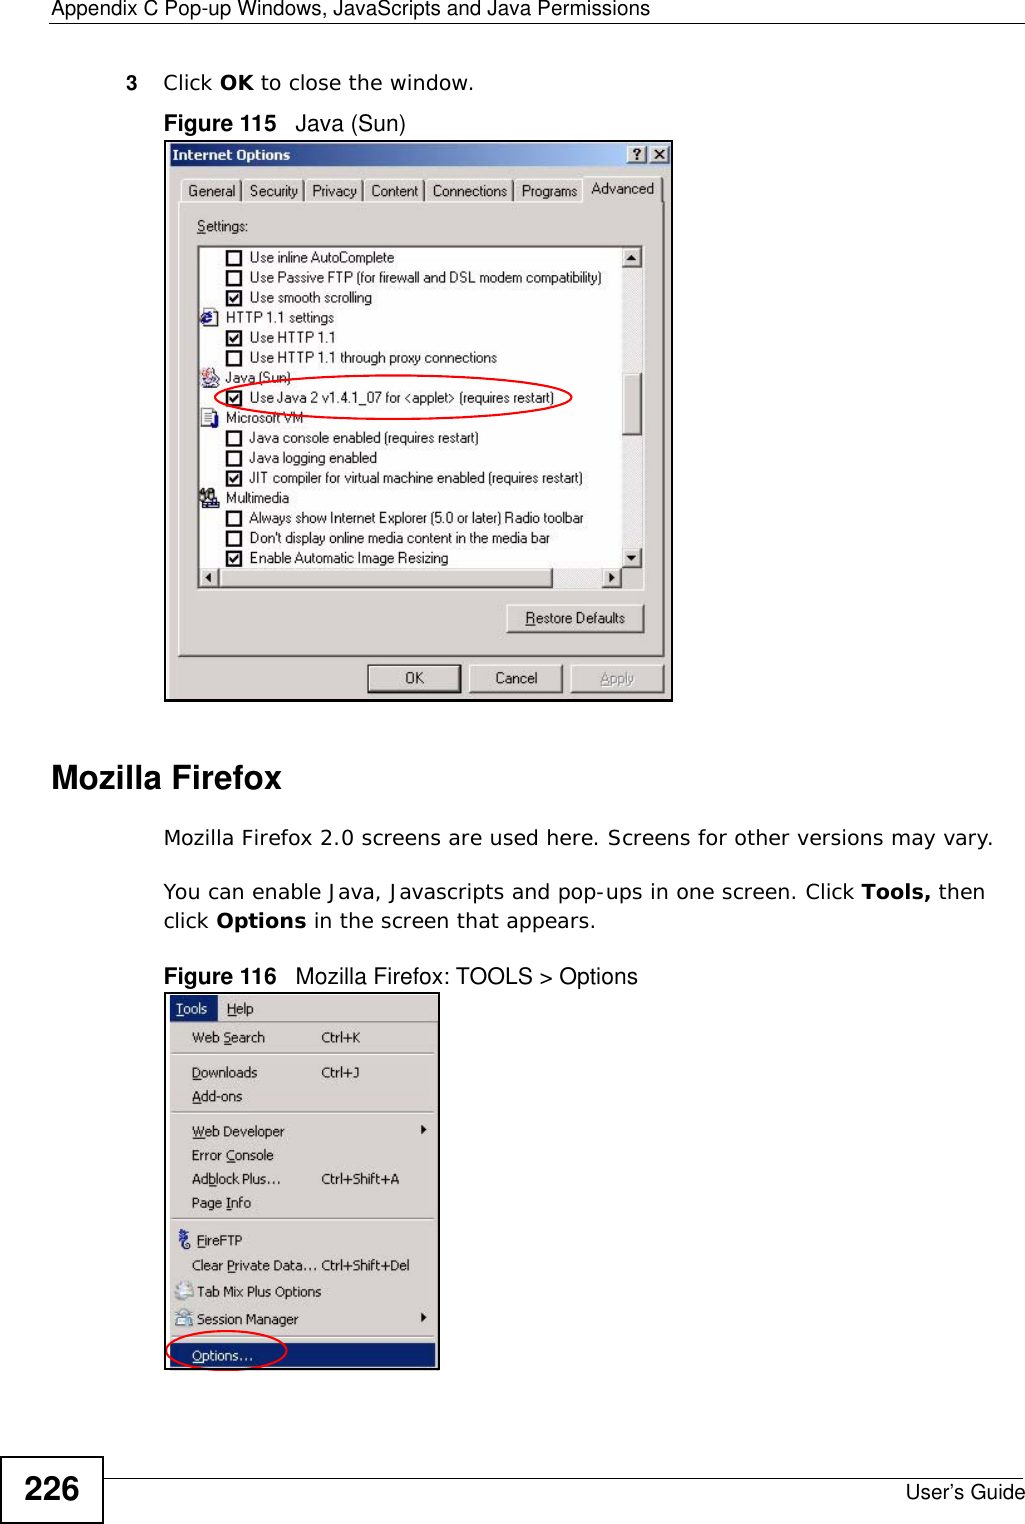 Appendix C Pop-up Windows, JavaScripts and Java PermissionsUser’s Guide2263Click OK to close the window.Figure 115   Java (Sun)Mozilla FirefoxMozilla Firefox 2.0 screens are used here. Screens for other versions may vary. You can enable Java, Javascripts and pop-ups in one screen. Click Tools, then click Options in the screen that appears.Figure 116   Mozilla Firefox: TOOLS &gt; Options